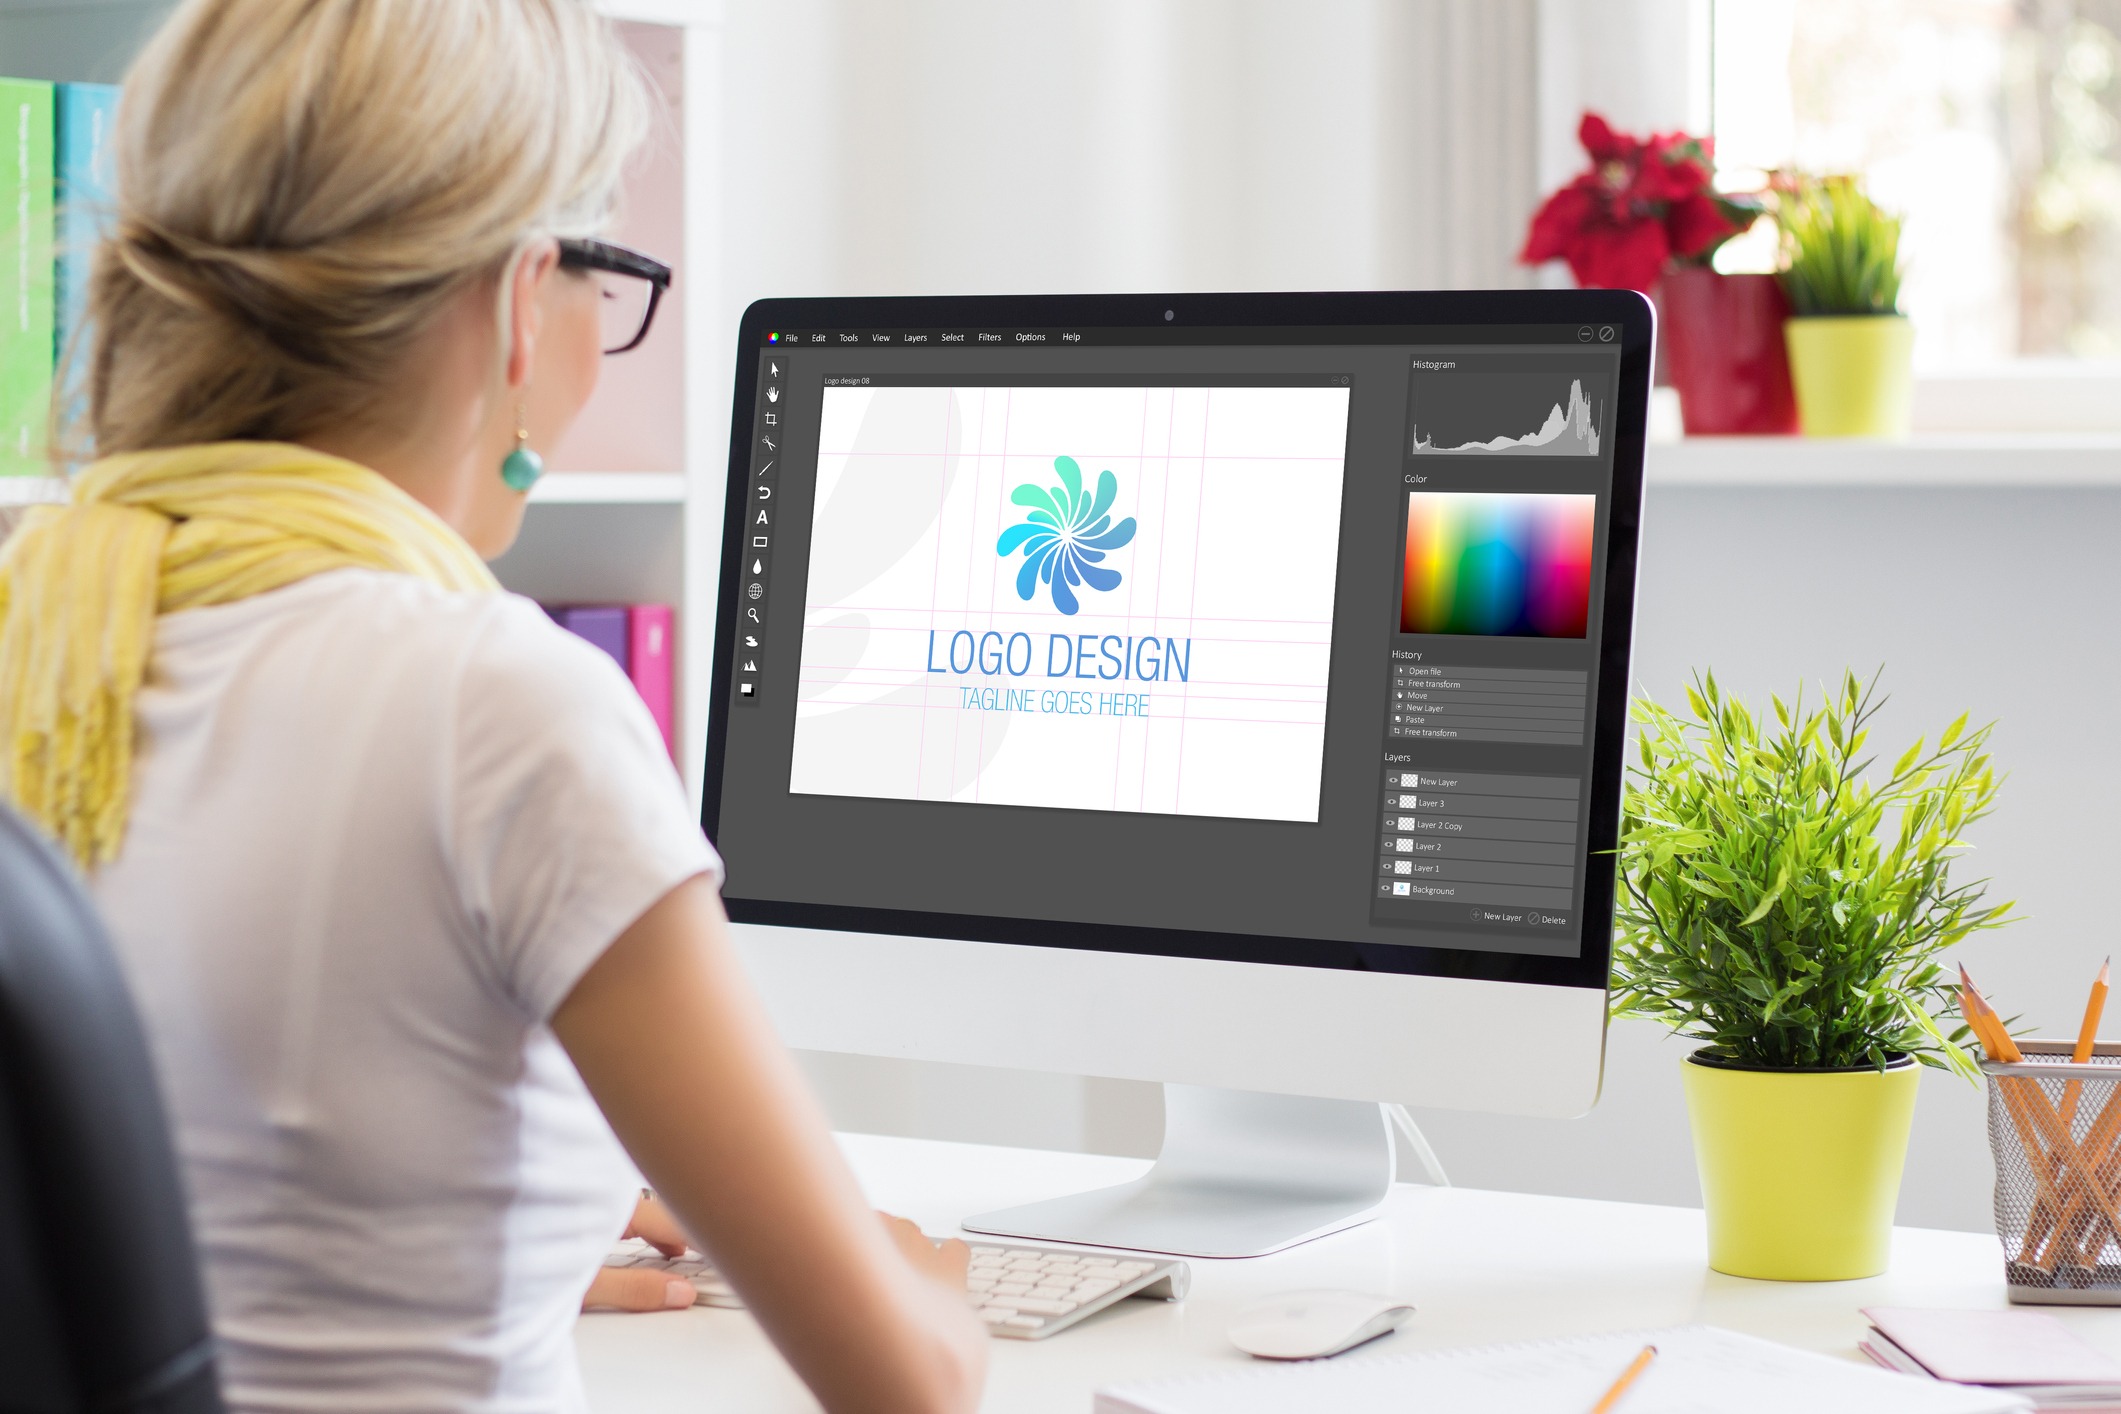 What Makes a Great Logo? Tips To Help Your Company Calling Card Stand Out